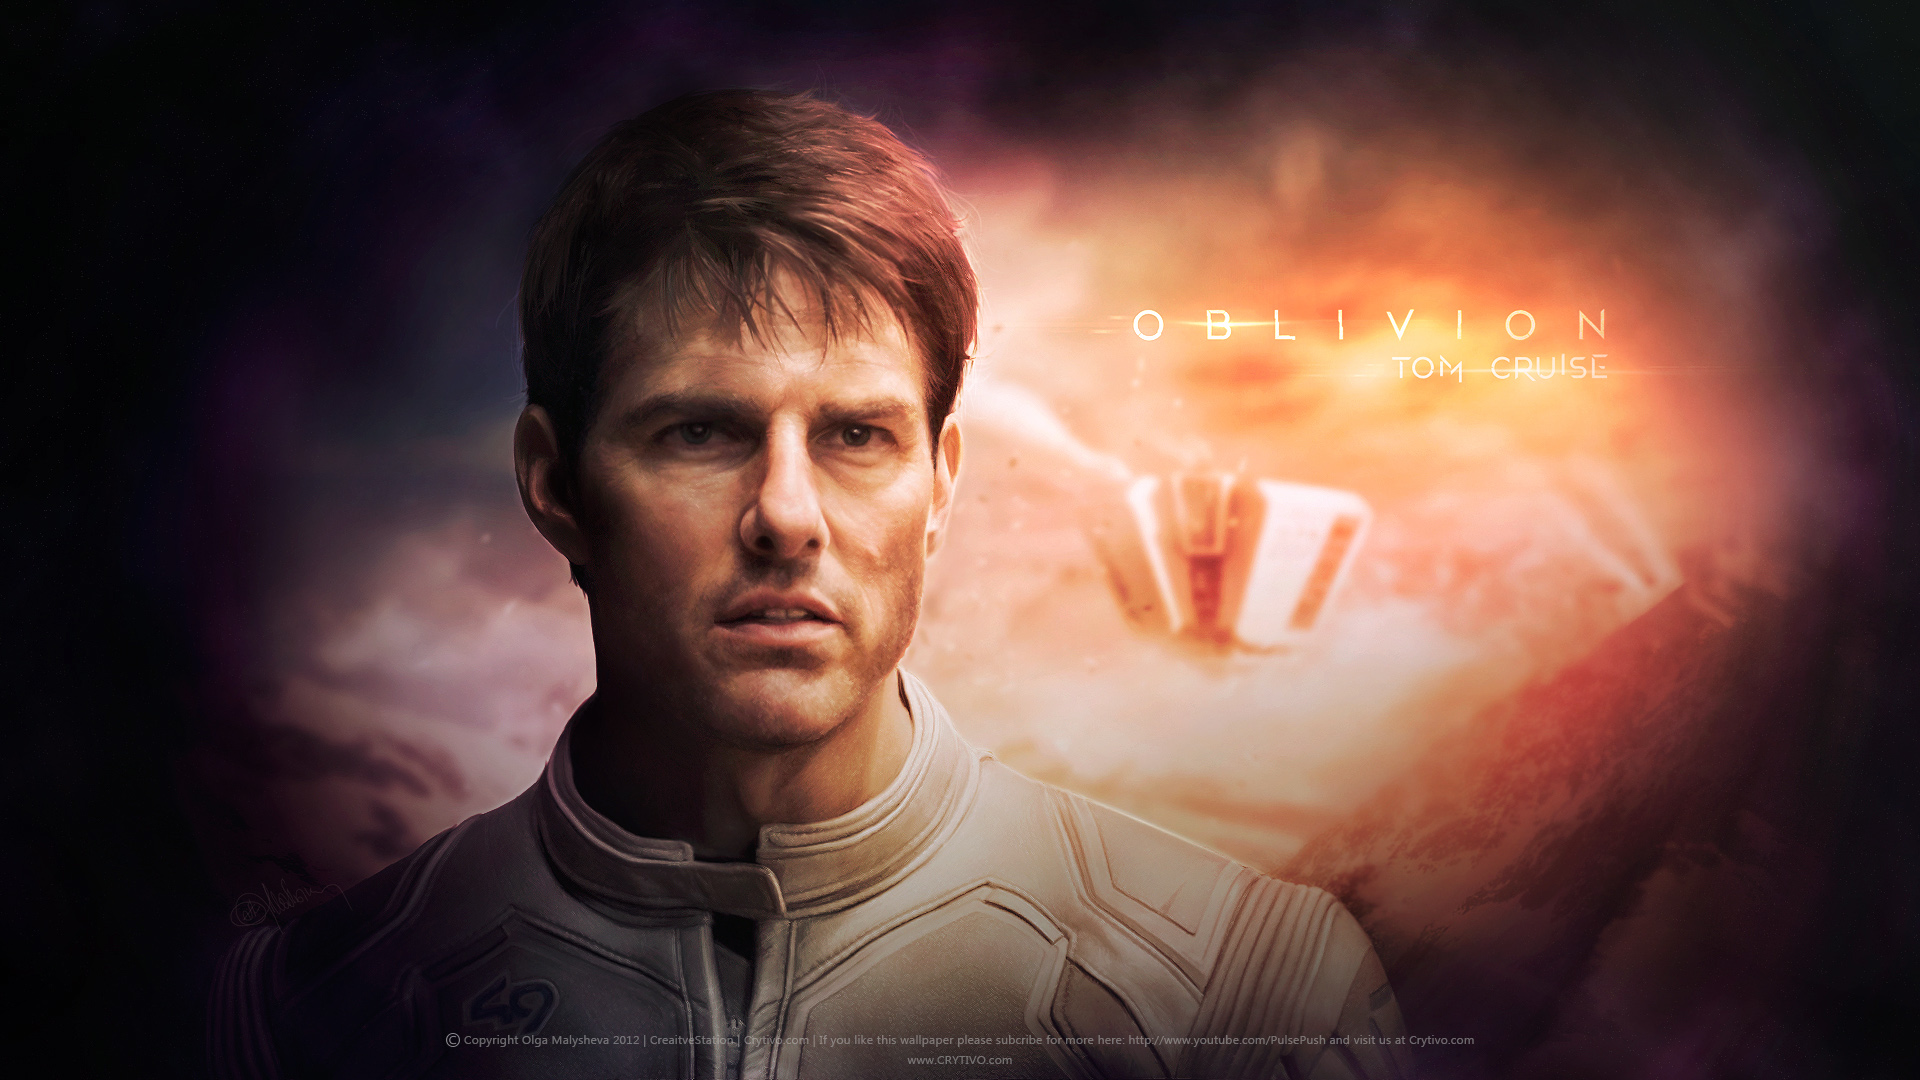 Tom Cruise Wallpaper High Resolution And Quality